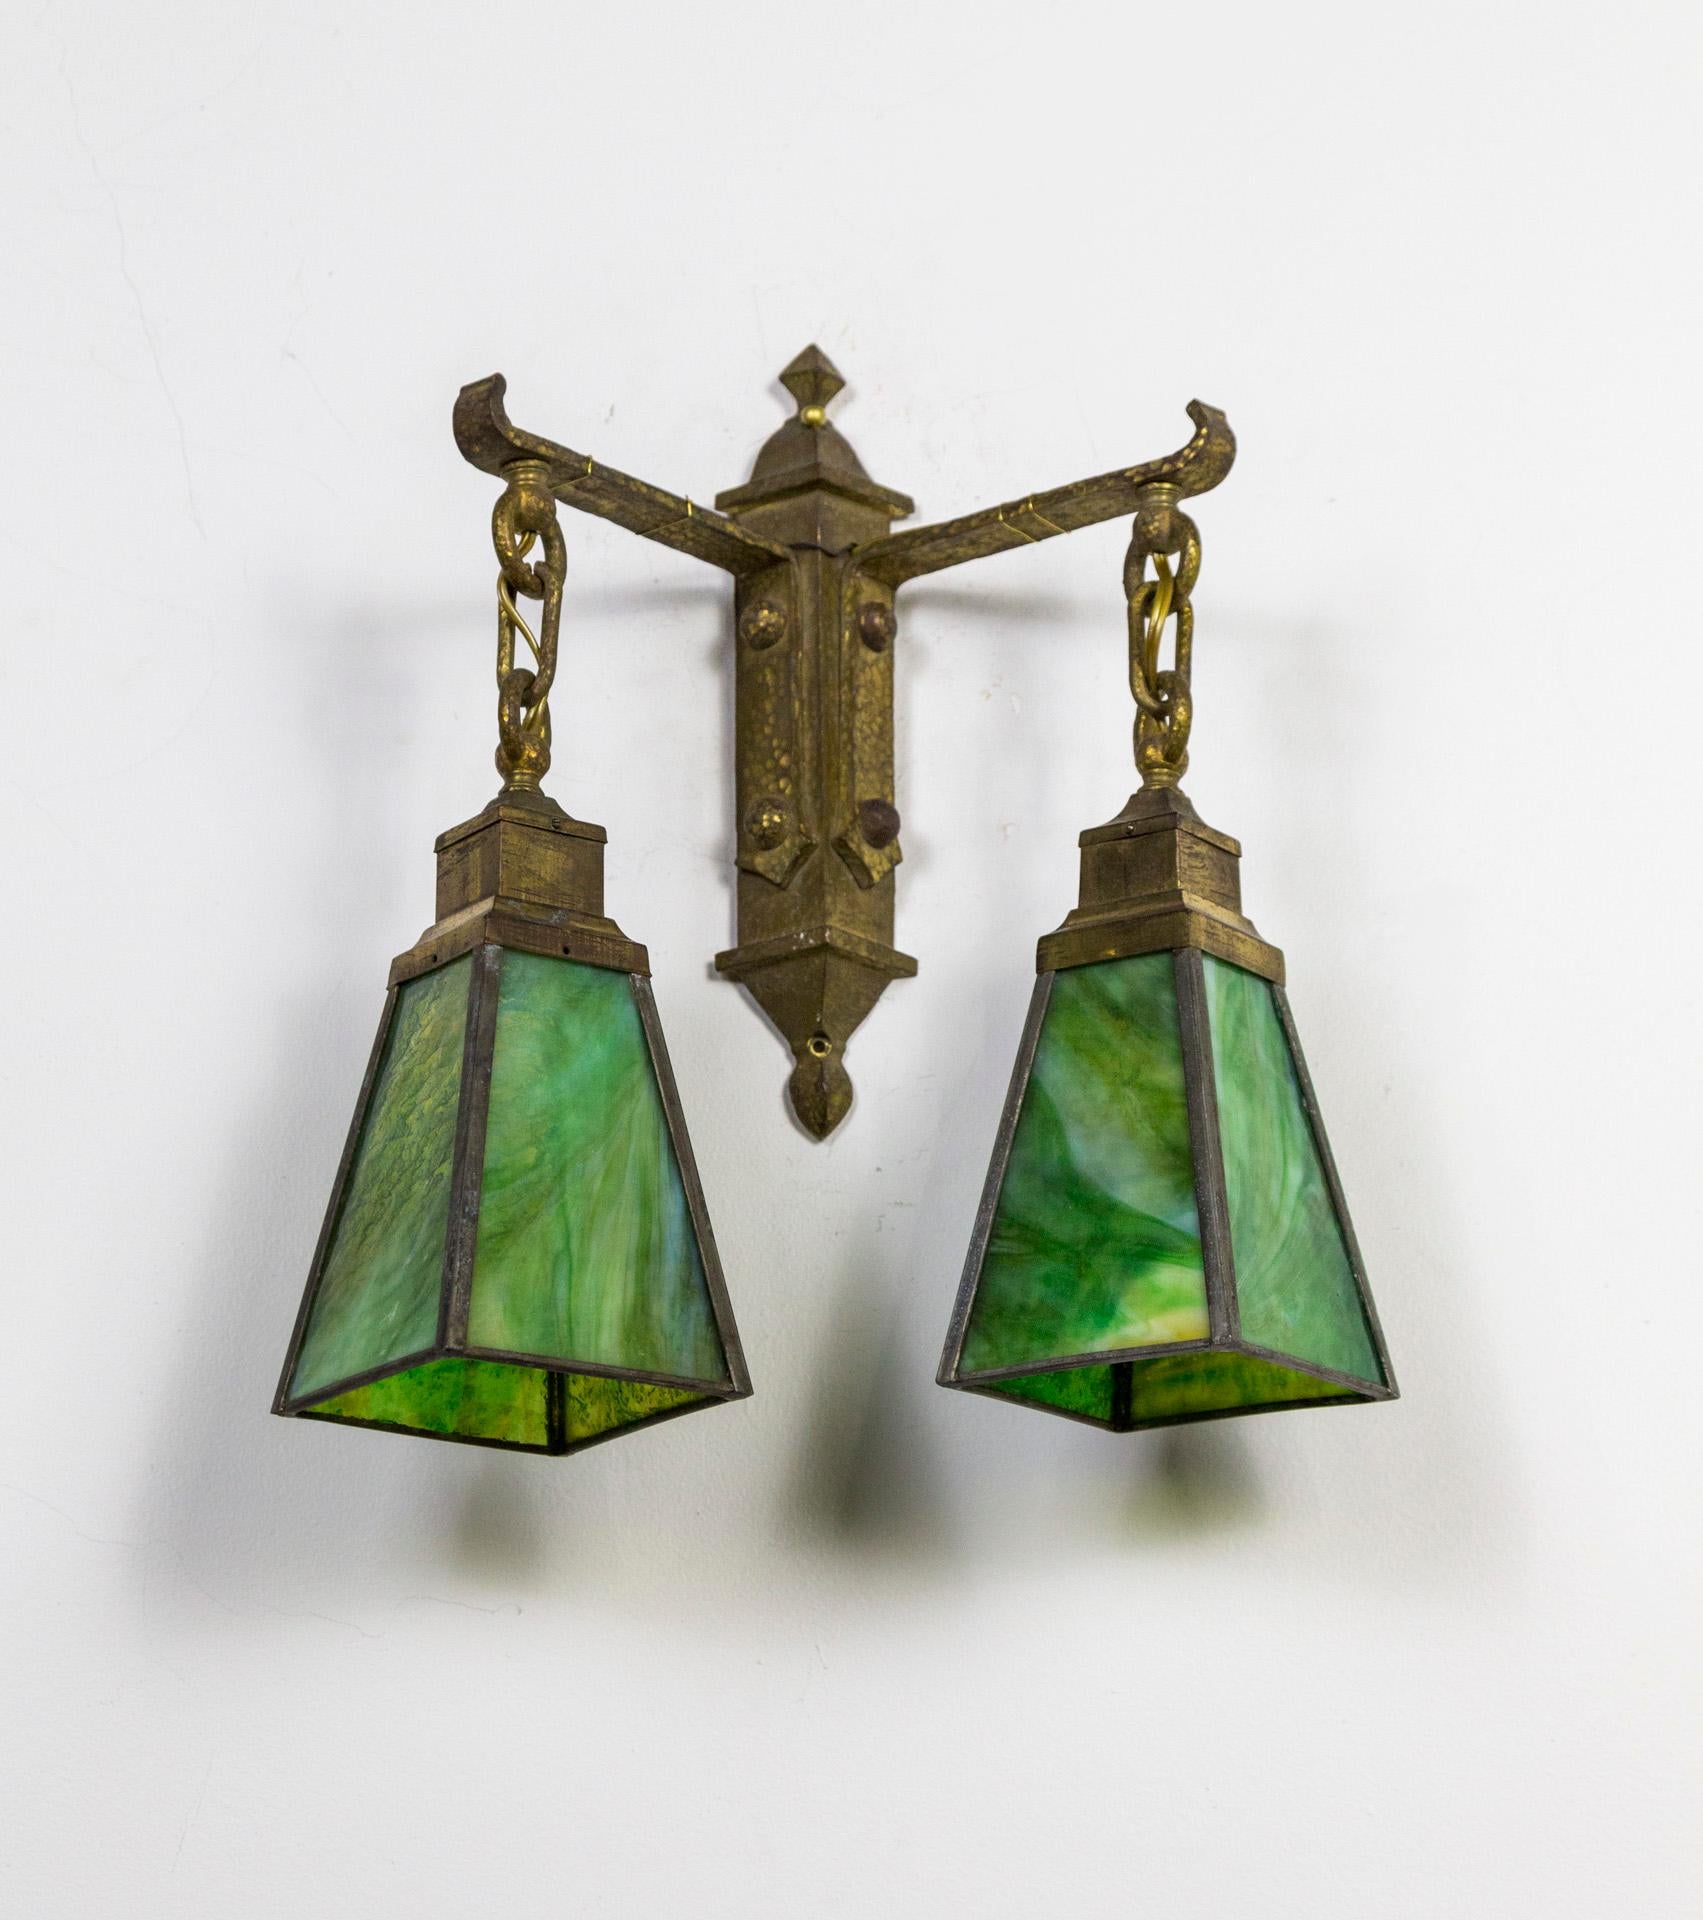 Craftsman Style, Arts & Crafts Period, 2-Light sconce with green, slag glass shades. Rustic and charming. Hand hammered, brass back plate with hand made details. Four sided shades in striking green, leaded art glass panels. 1920s, USA. Newly wired